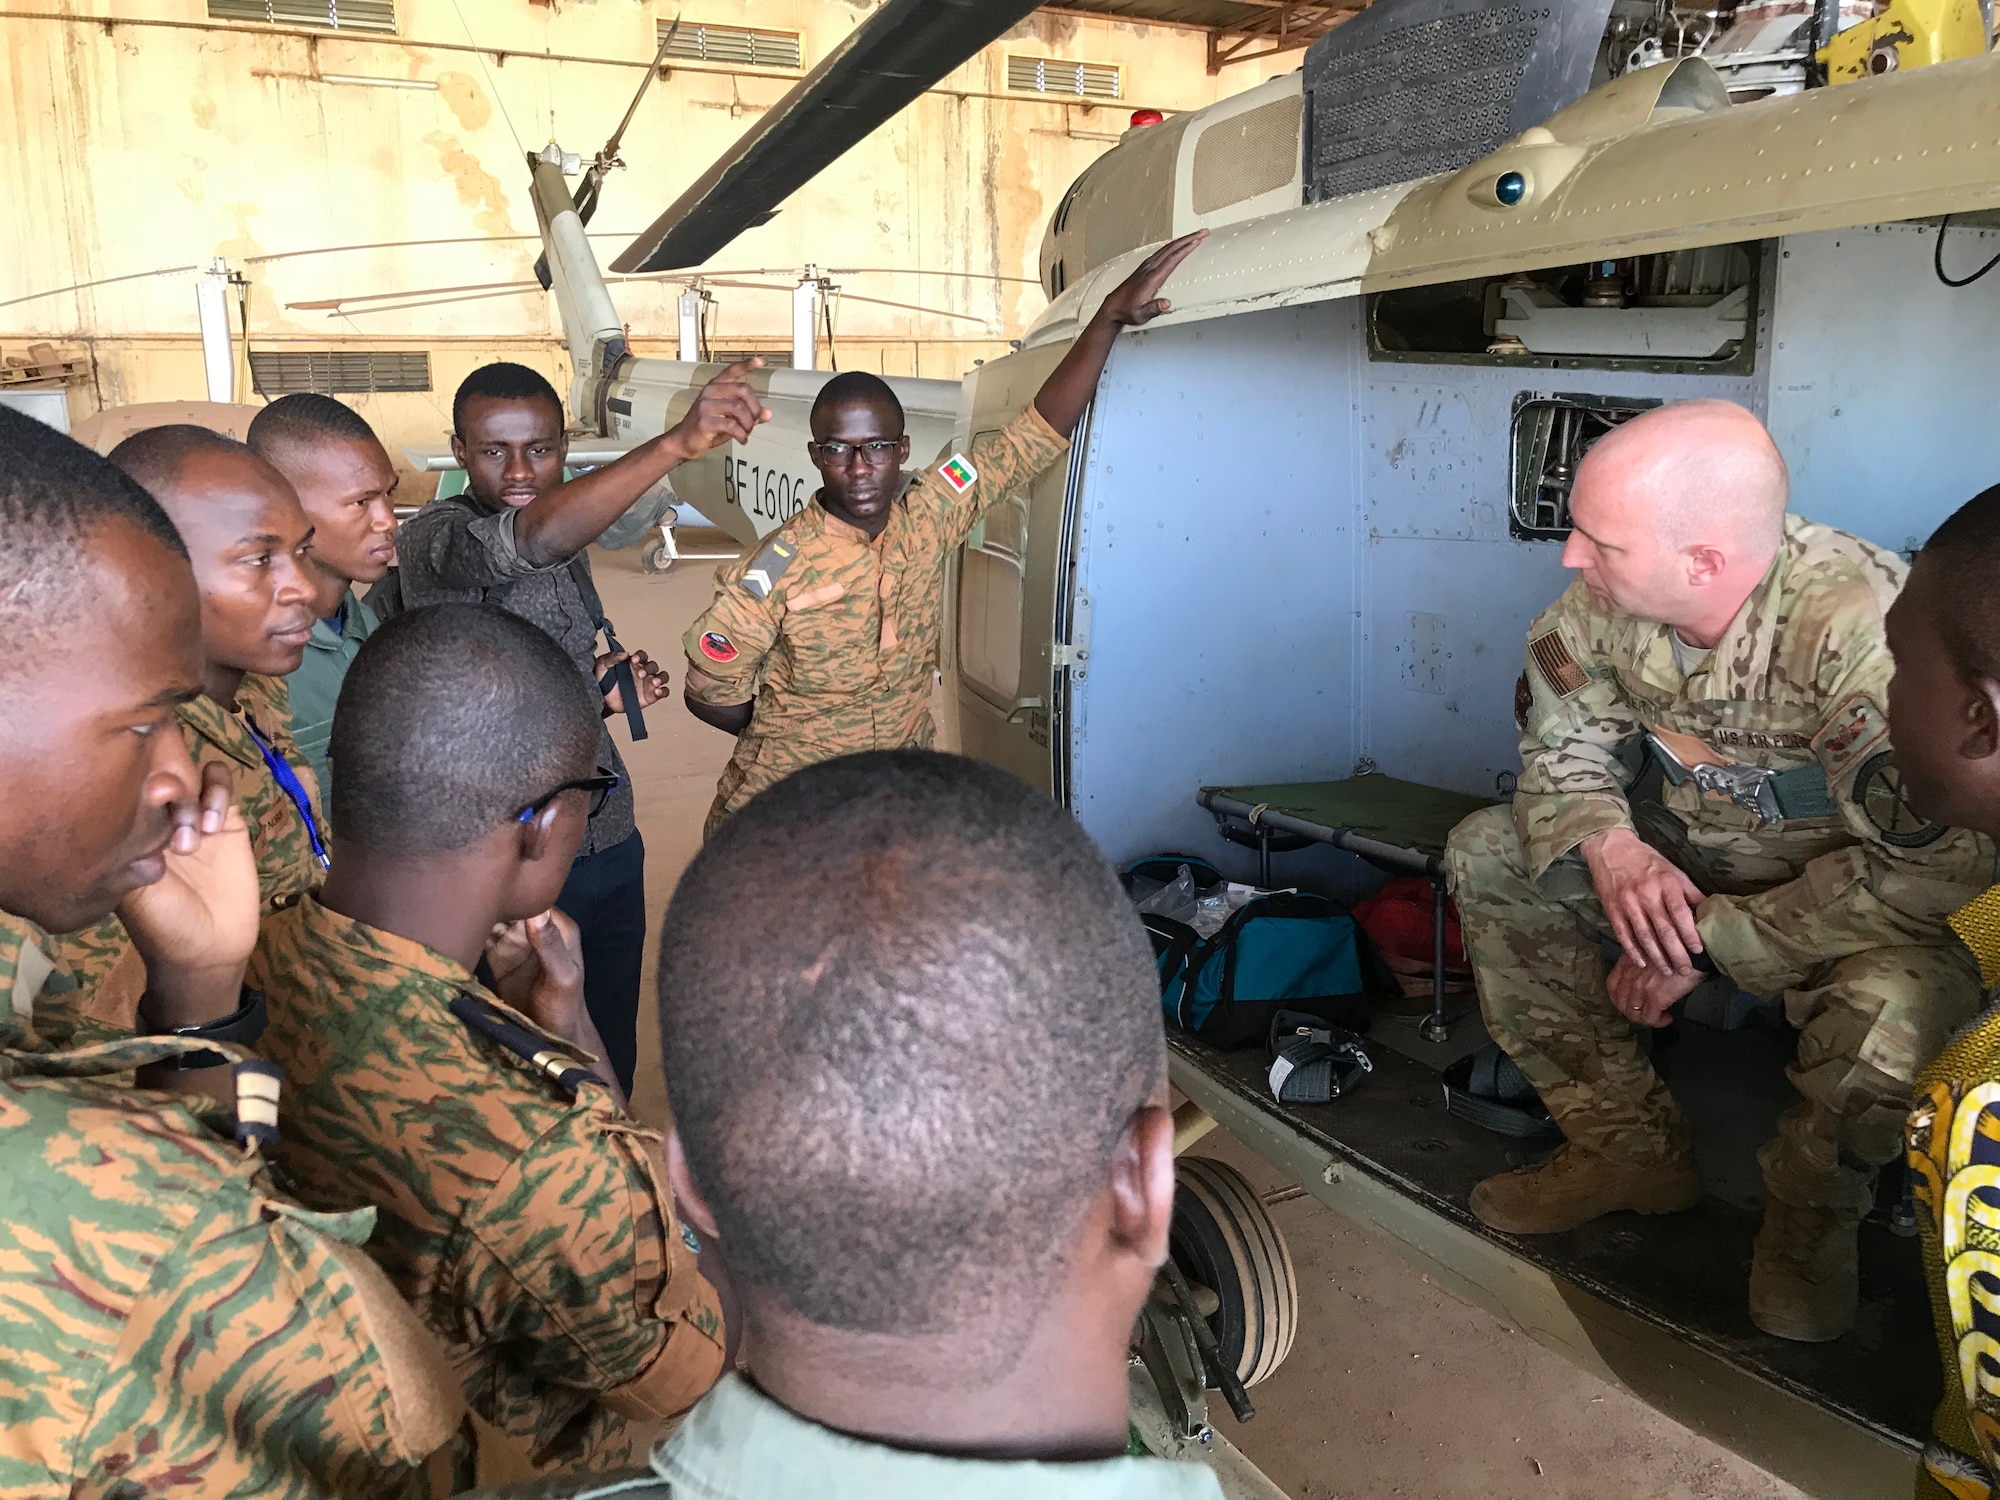 Master Sgt. Todd Chandler, right, 40th Helicopter Squadron flight engineer, leads a small group discussion focusing on aircrew in-flight responsibilities and post flight inspections with flight engineers and mechanics from the Burkina Faso Air Force at Airbase 511 in Burkina Faso, Africa, April 11, 2019.  Chandler augmented the 818th Mobility Support Advisory Squadron during their building partner capacity engagement to Burkina Faso, Africa, April 5-20. (U.S. Air Force photo by Master Sgt. Sarah Colwell)